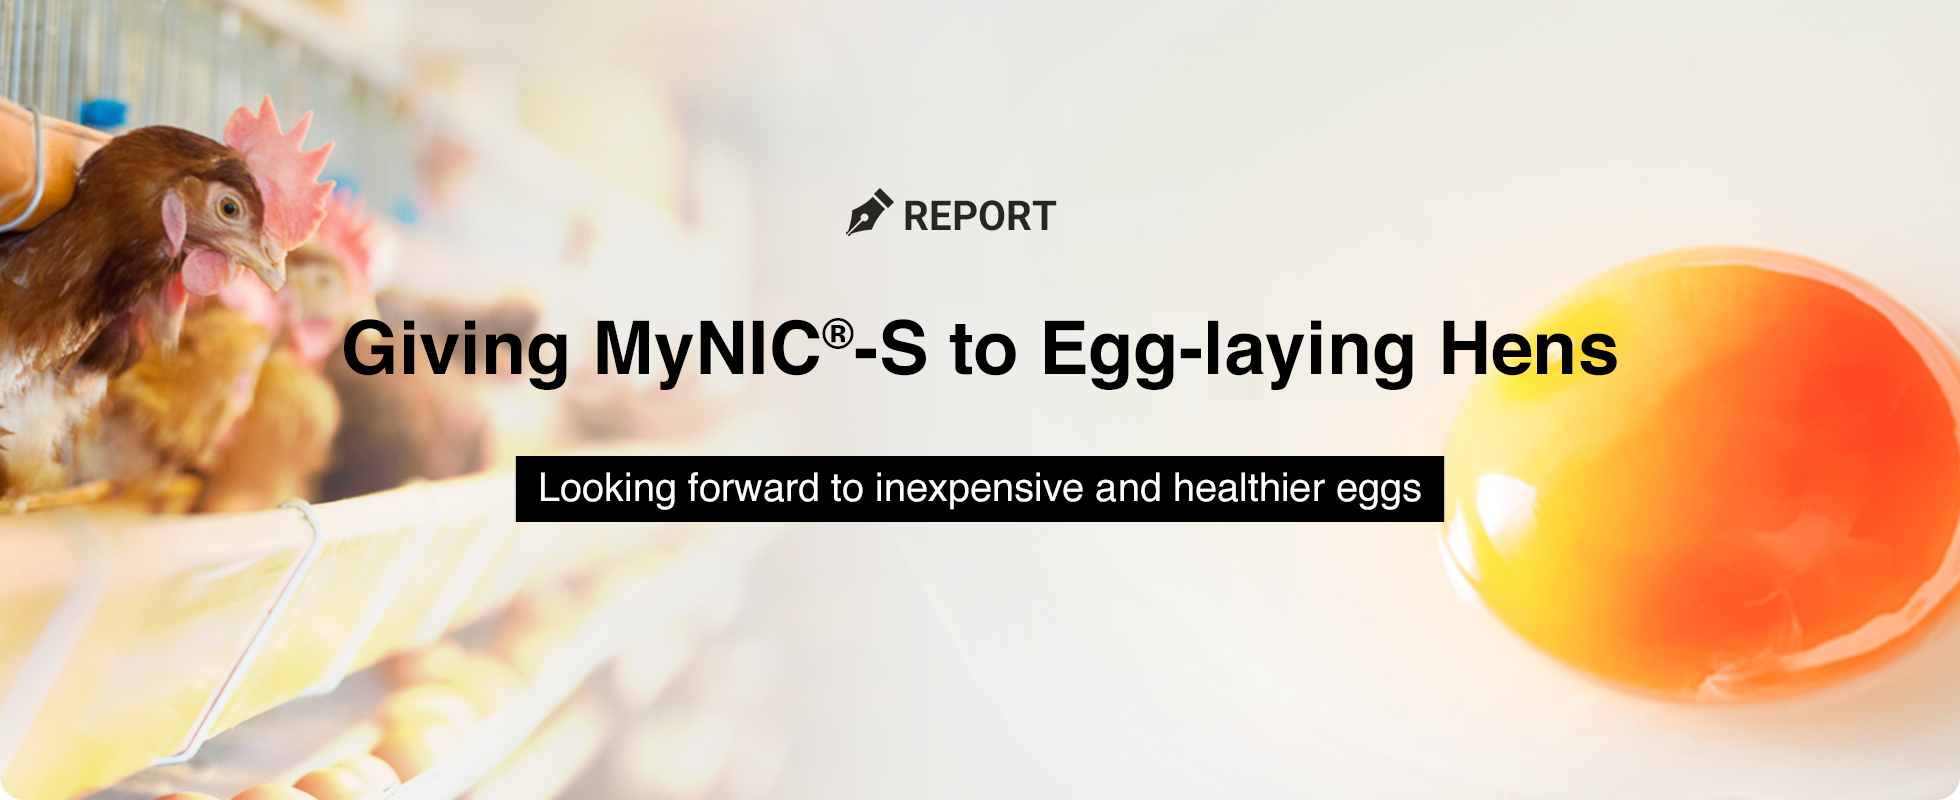 Giving MyNIC®-S to Egg-laying Hens. Looking forward to inexpensive and healthier eggs.